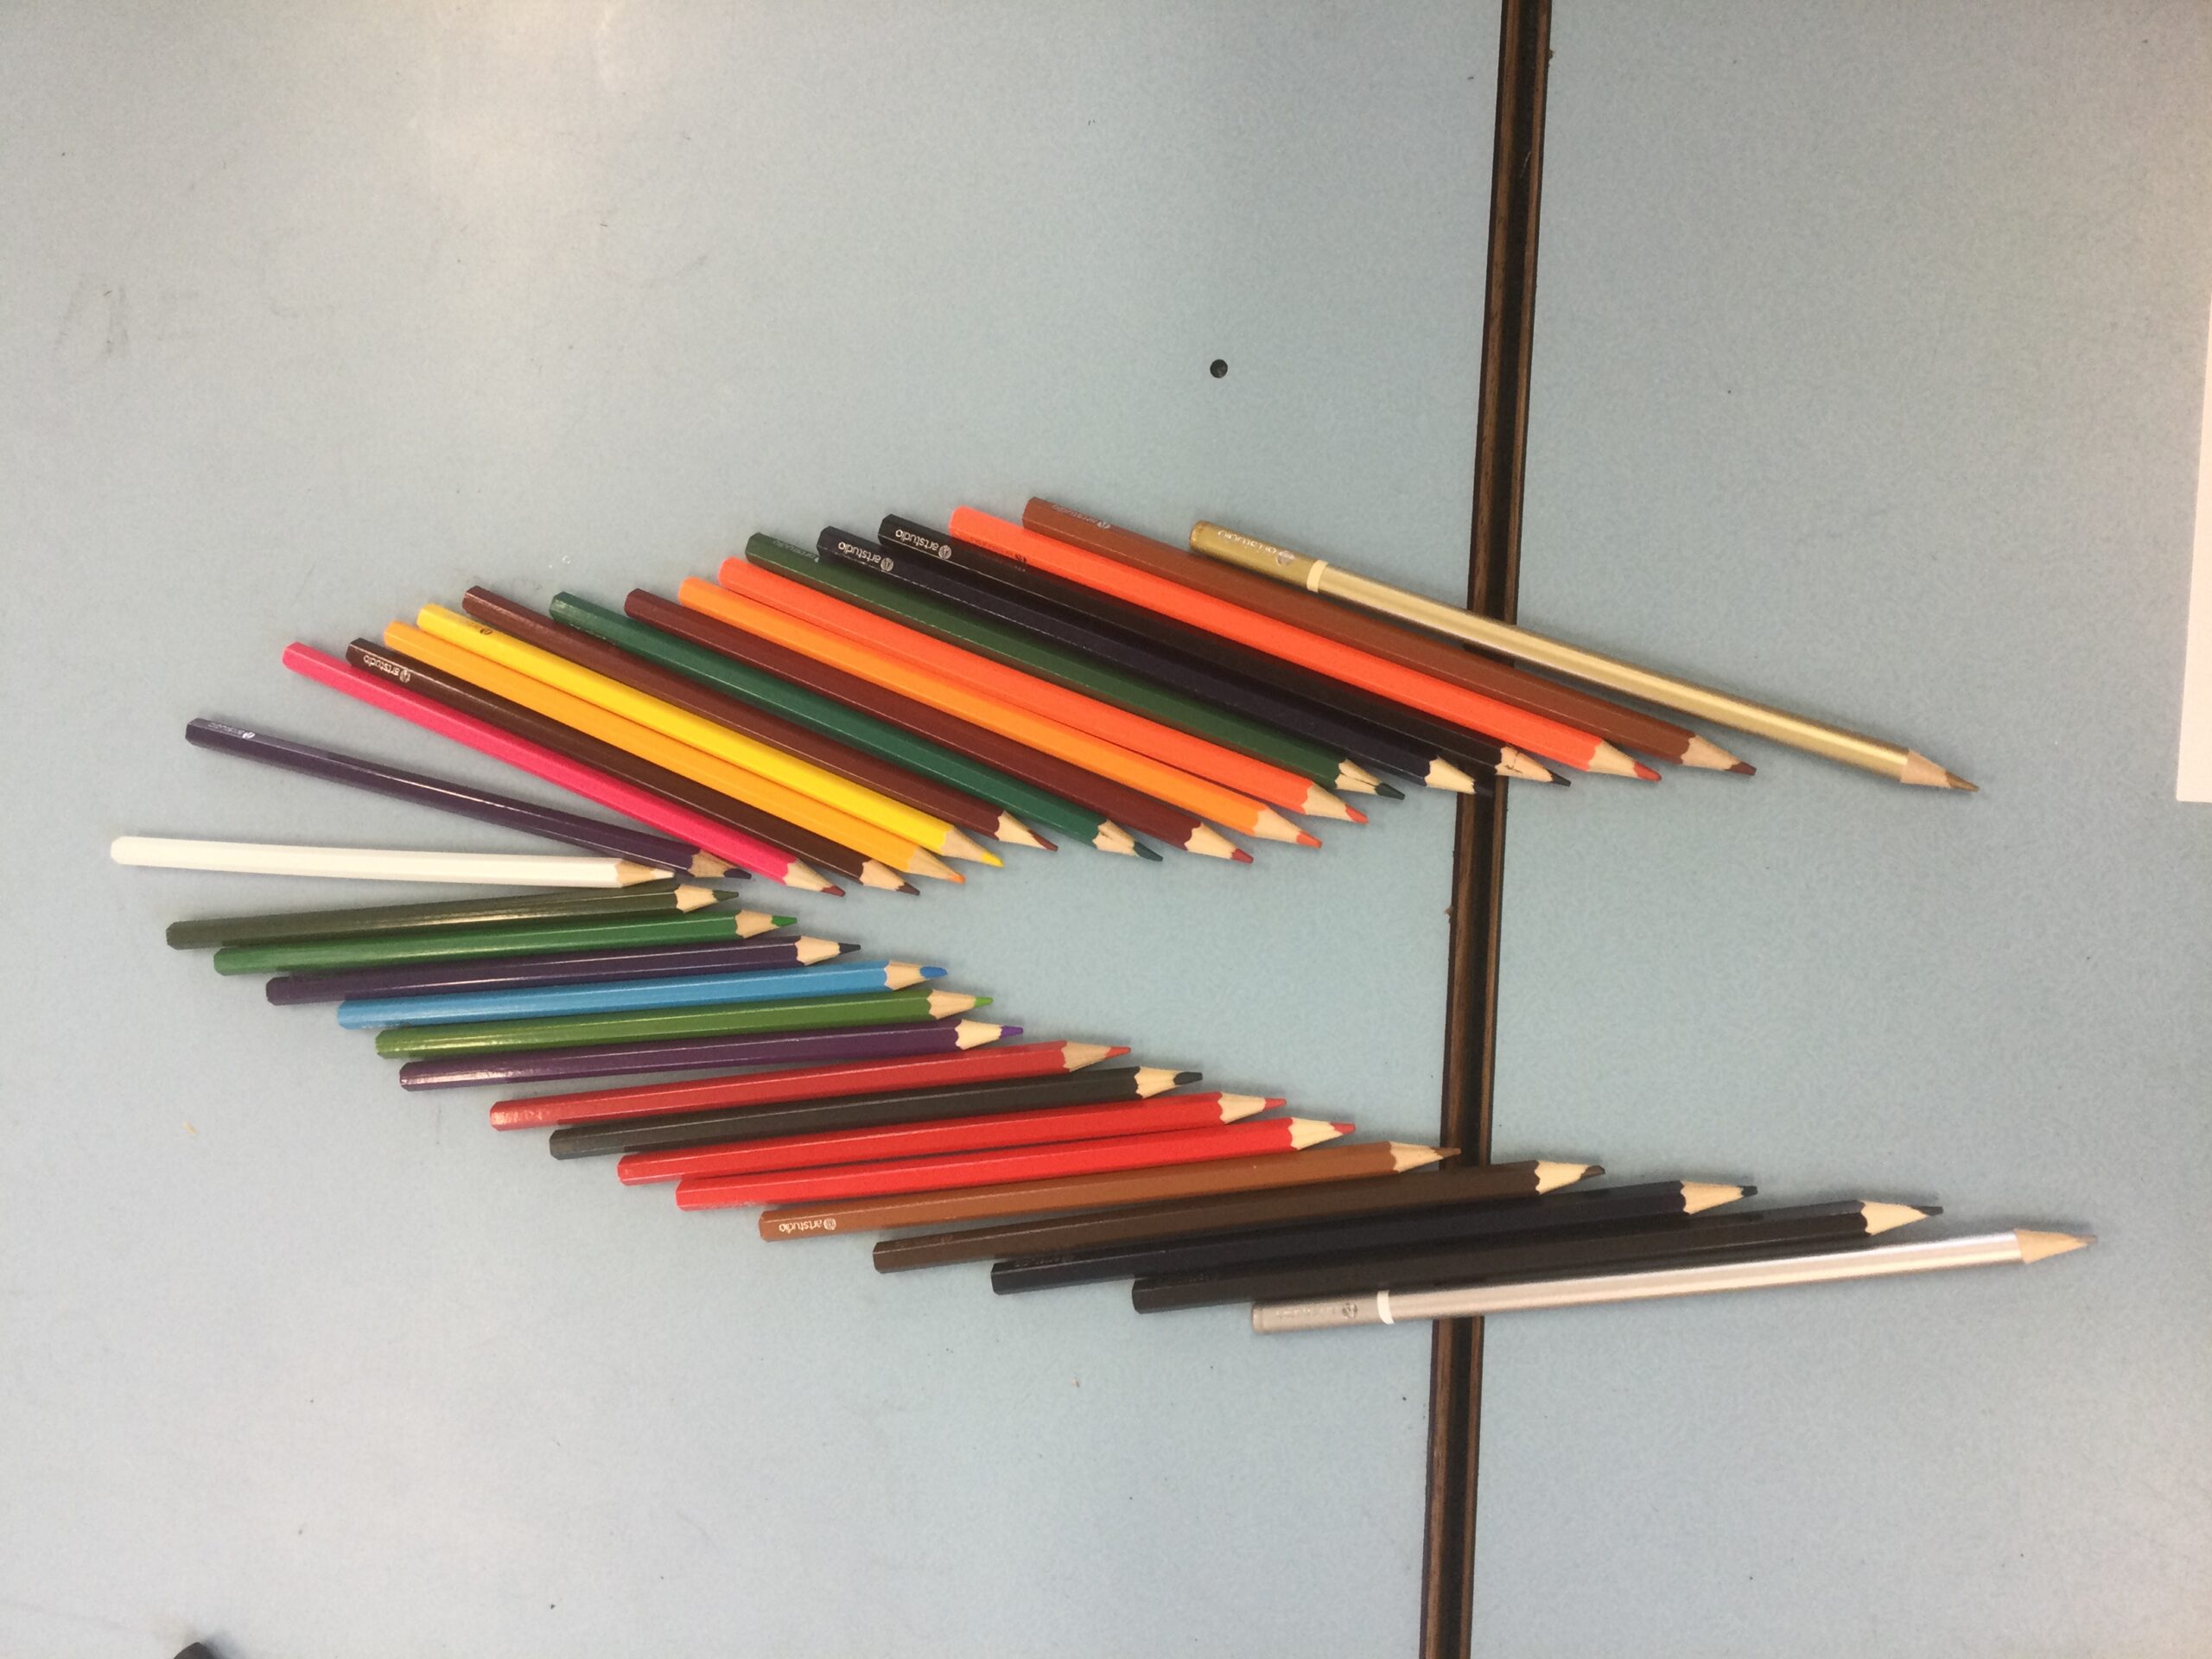 A collection of coloured pencils laid out in a chevron shape